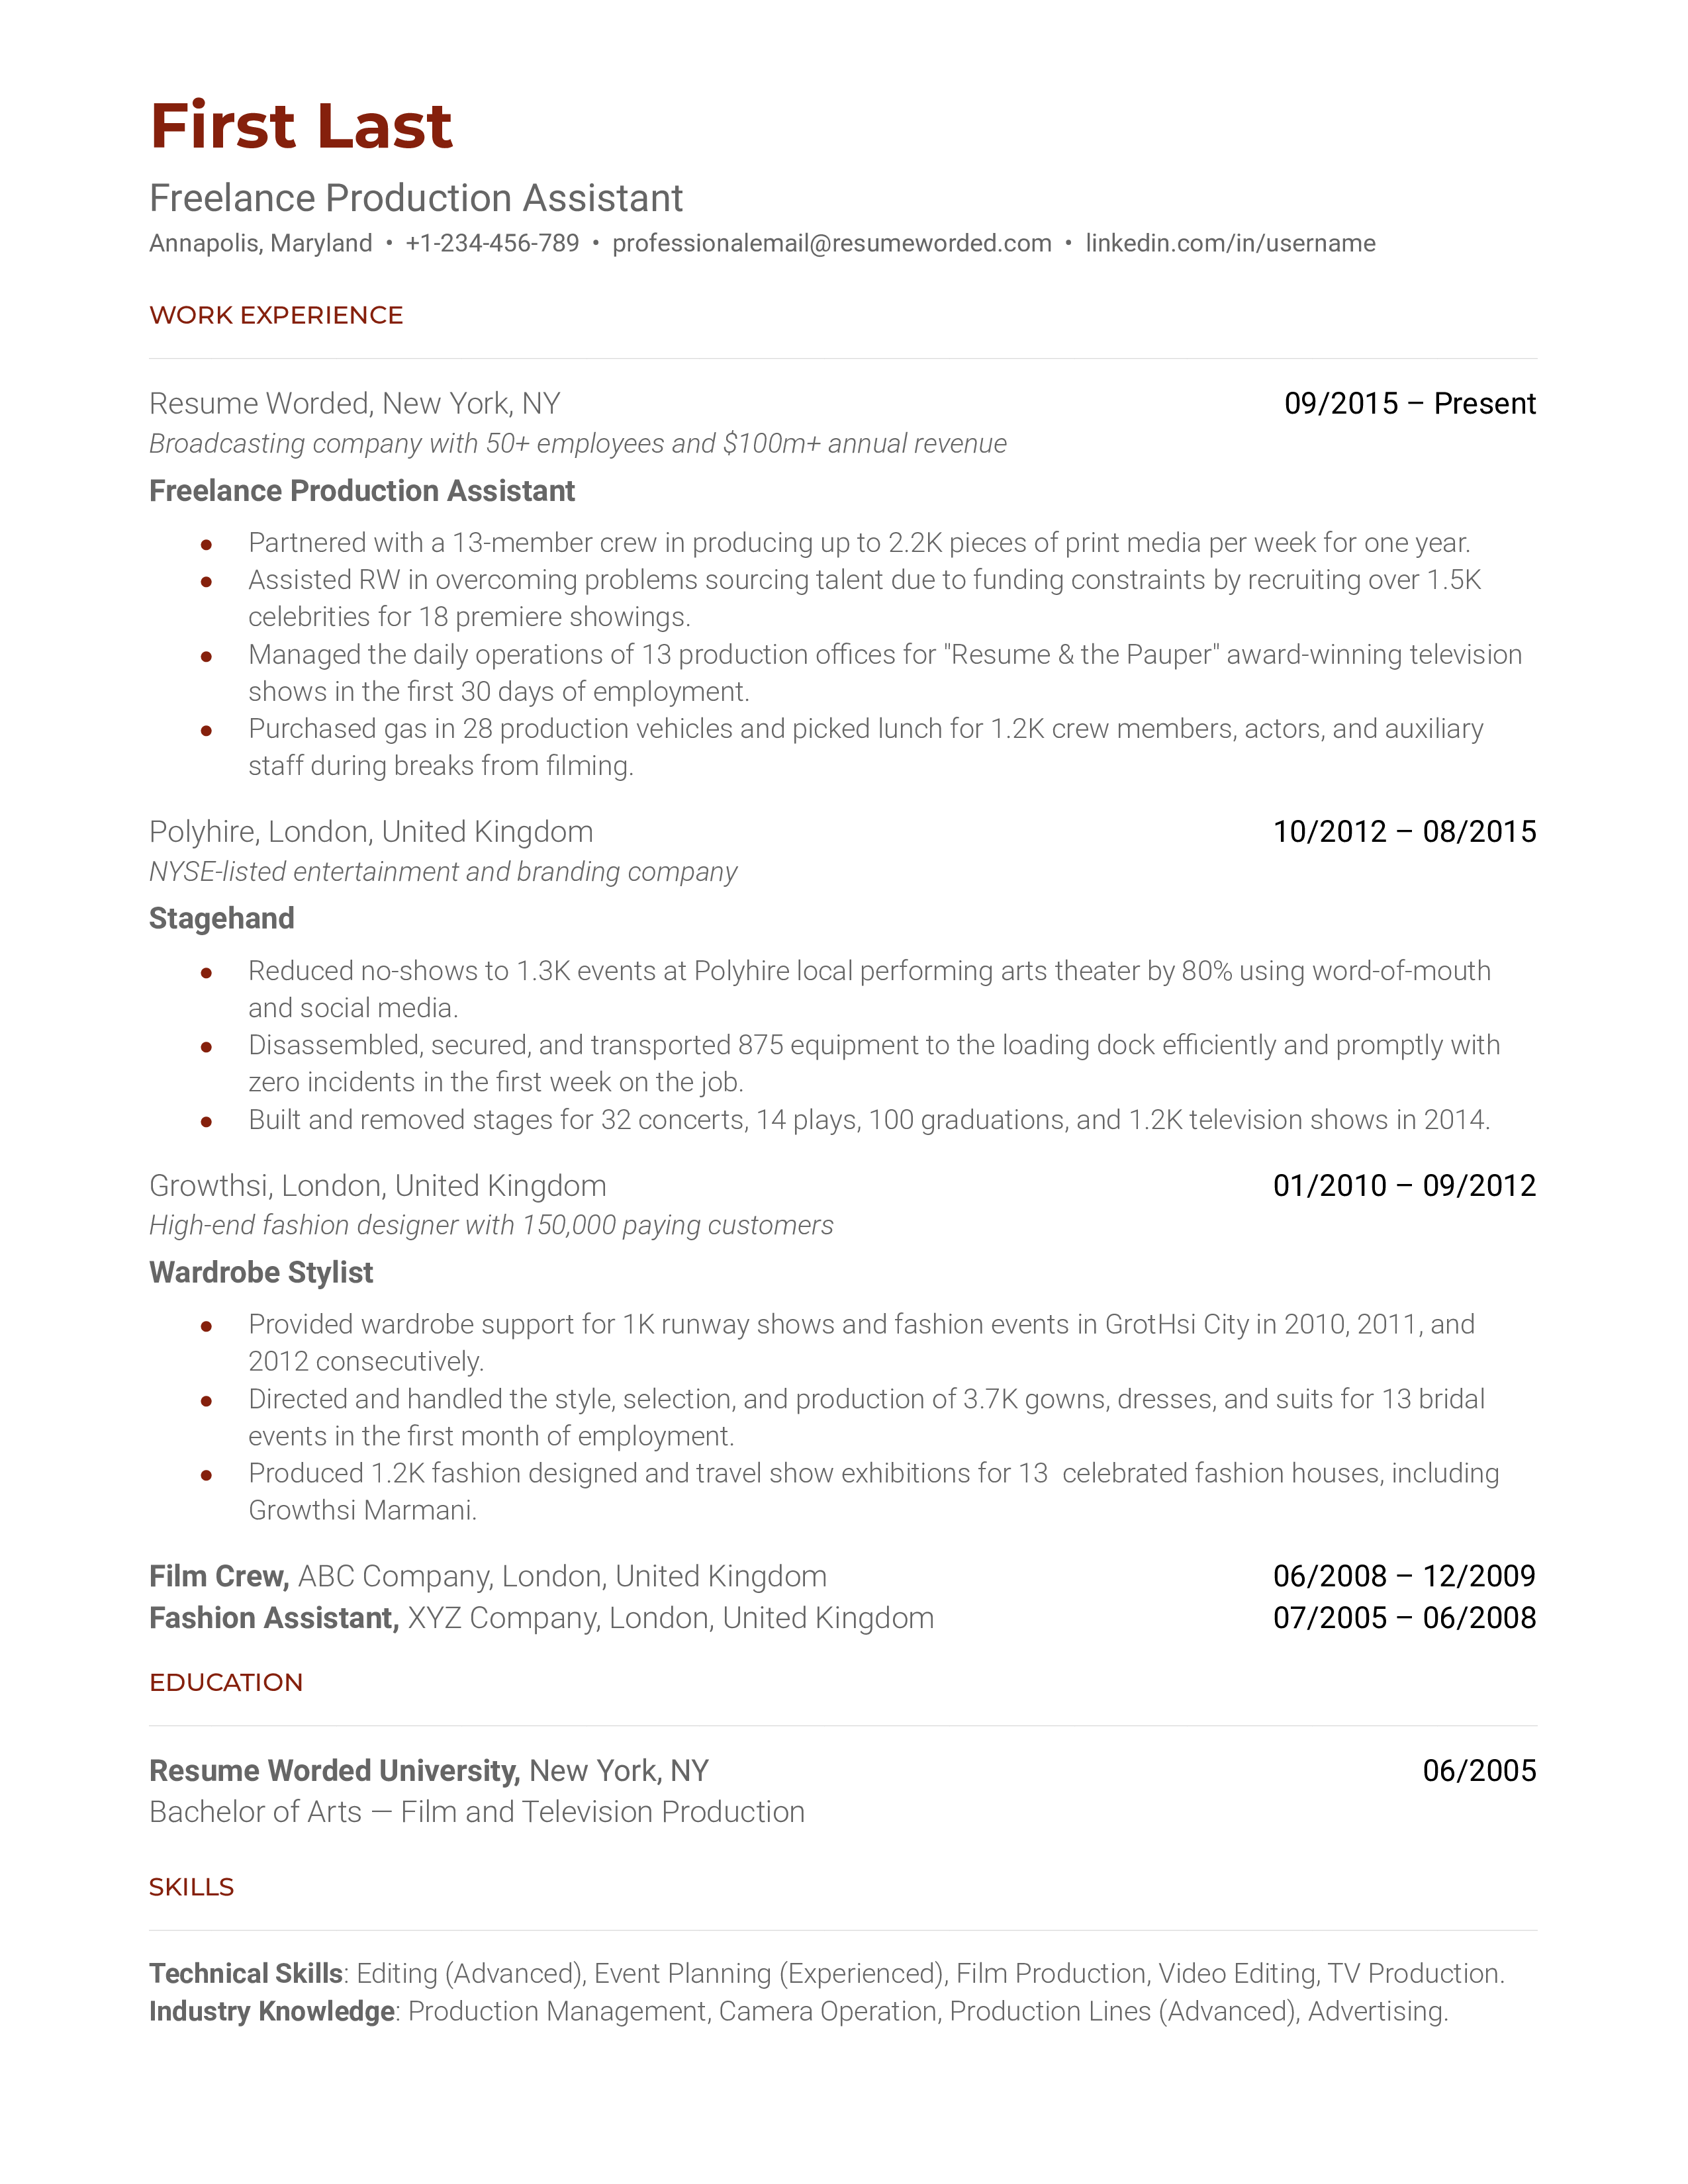 A resume for a freelance production assistant with a bachelors degree in film and experience as a stagehand and wardrobe stylist.